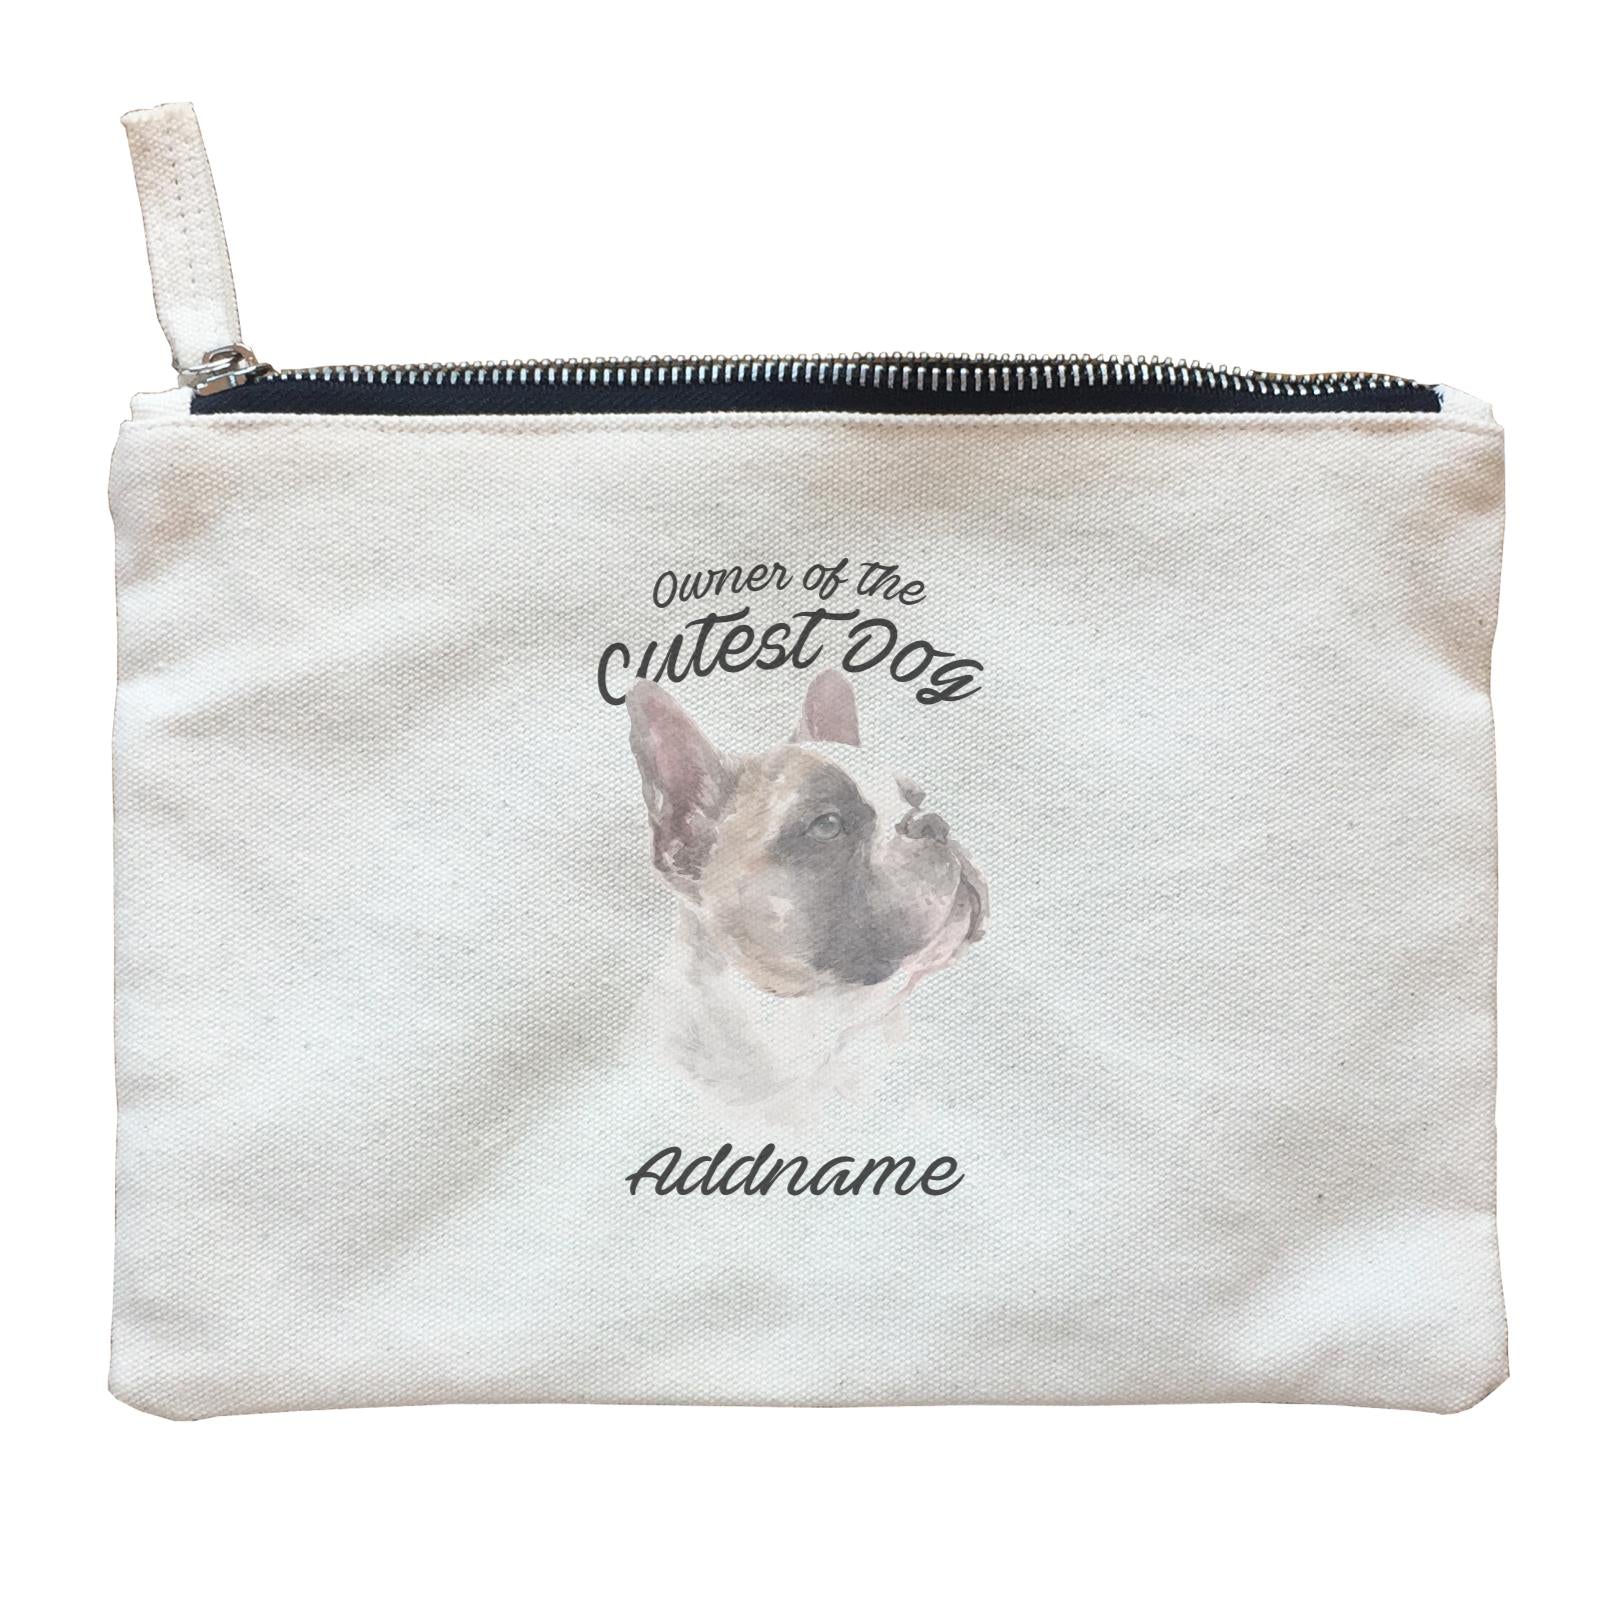 Watercolor Dog Owner Of The Cutest Dog French Bulldog Addname Zipper Pouch